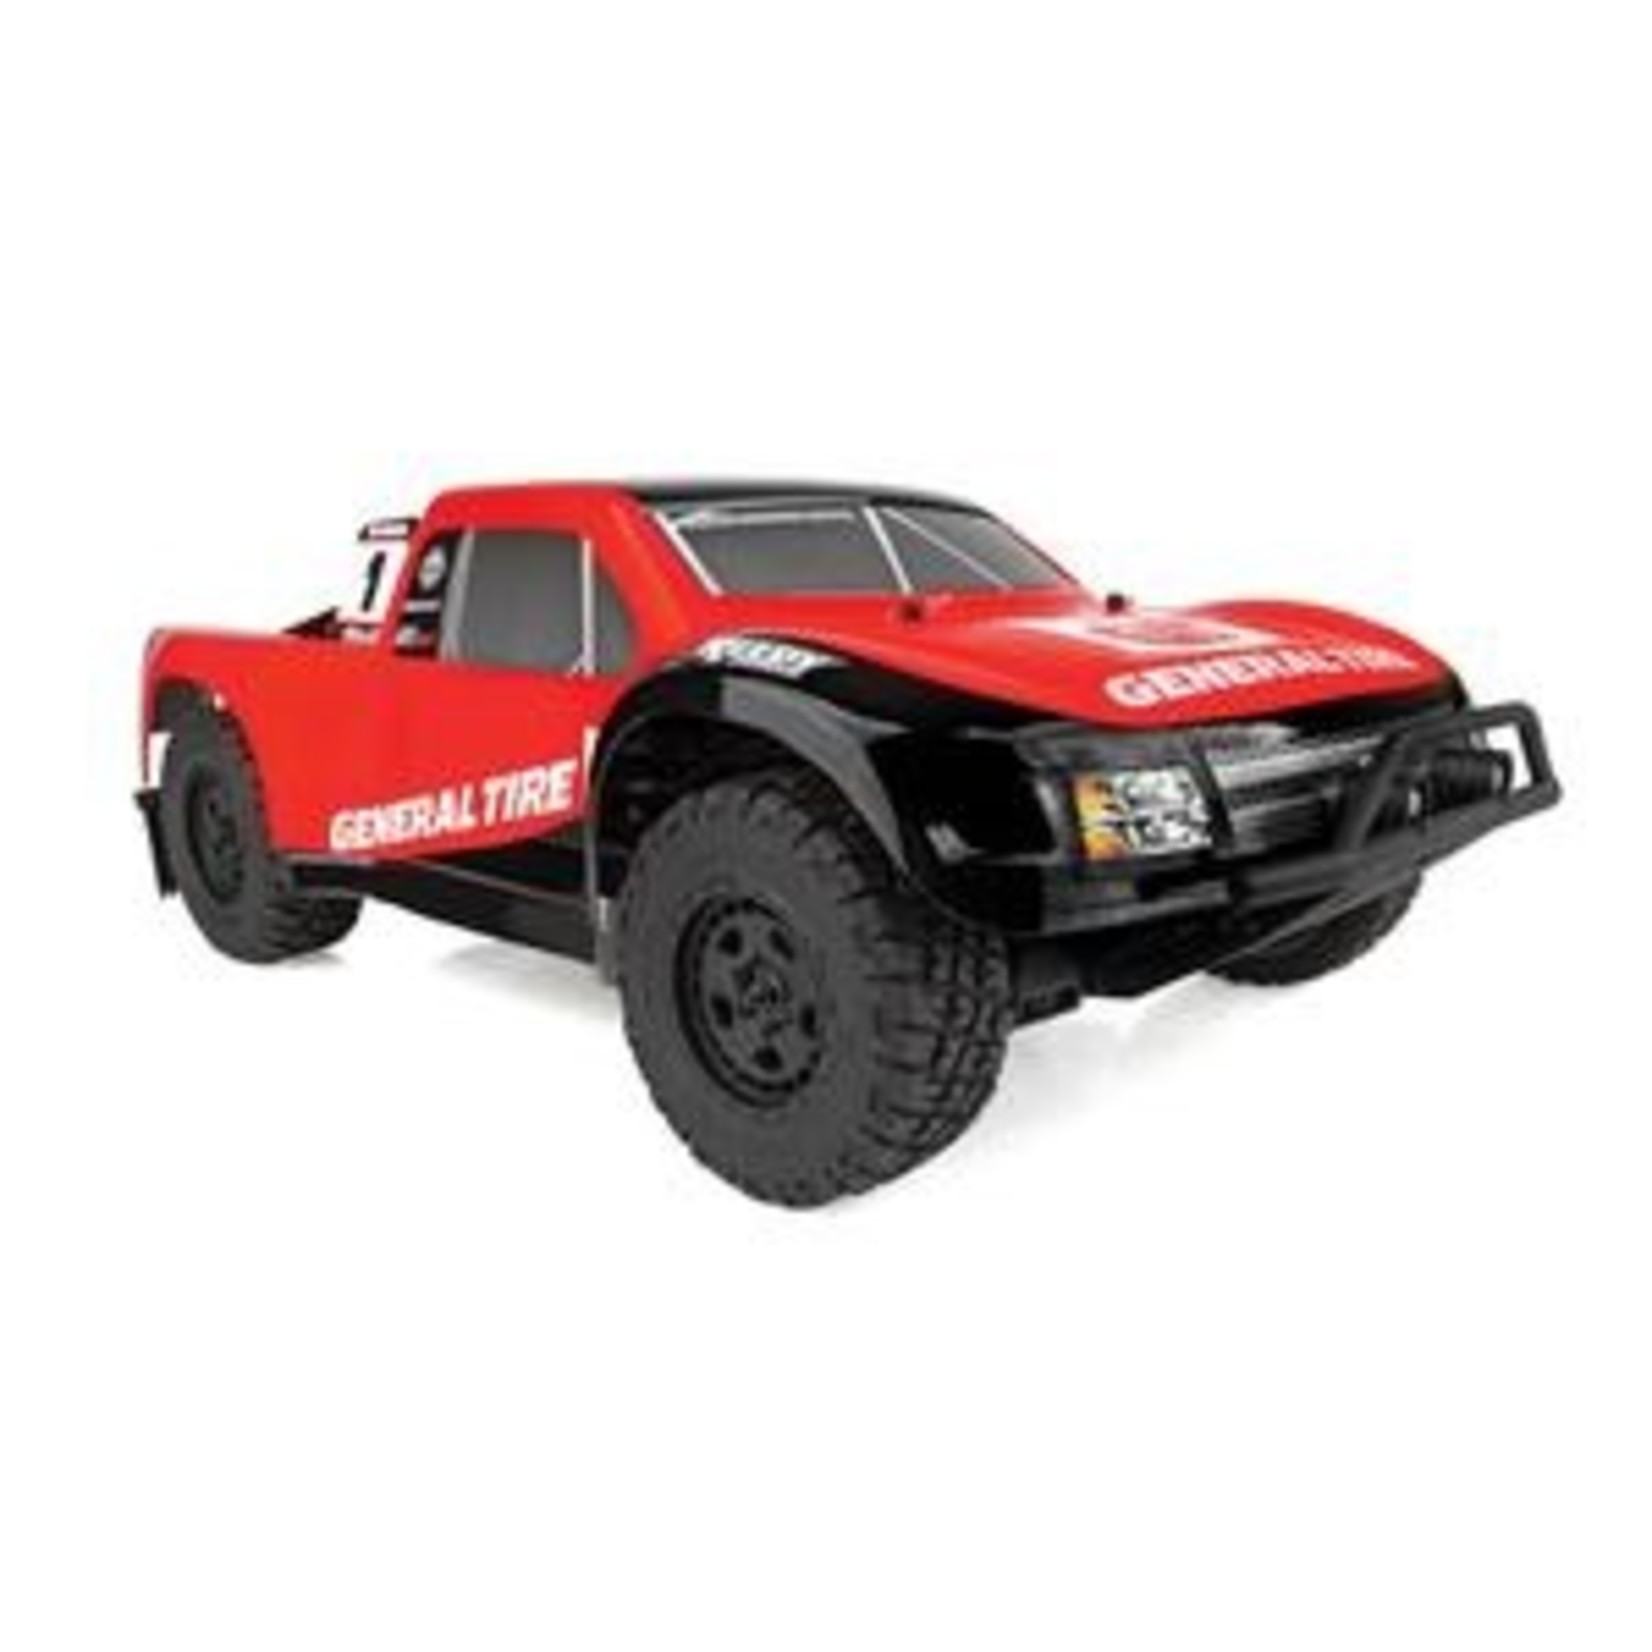 Team Associated ASC20531 Pro4 SC10 General Tire Off-Road 1/10 4WD Electric Short Course Truck RTR